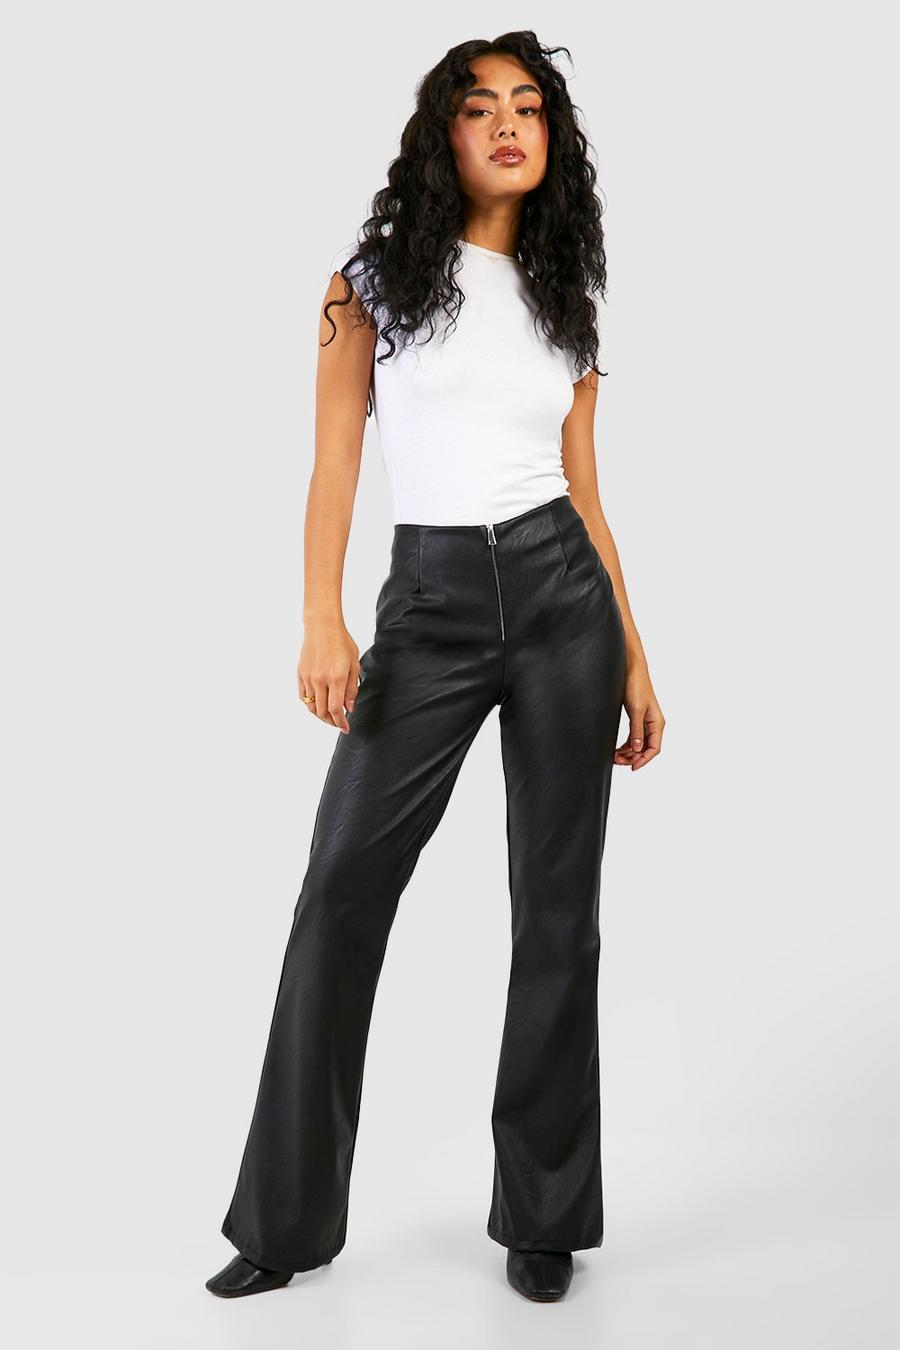 Black Leather Look Zip Front Flare Pants